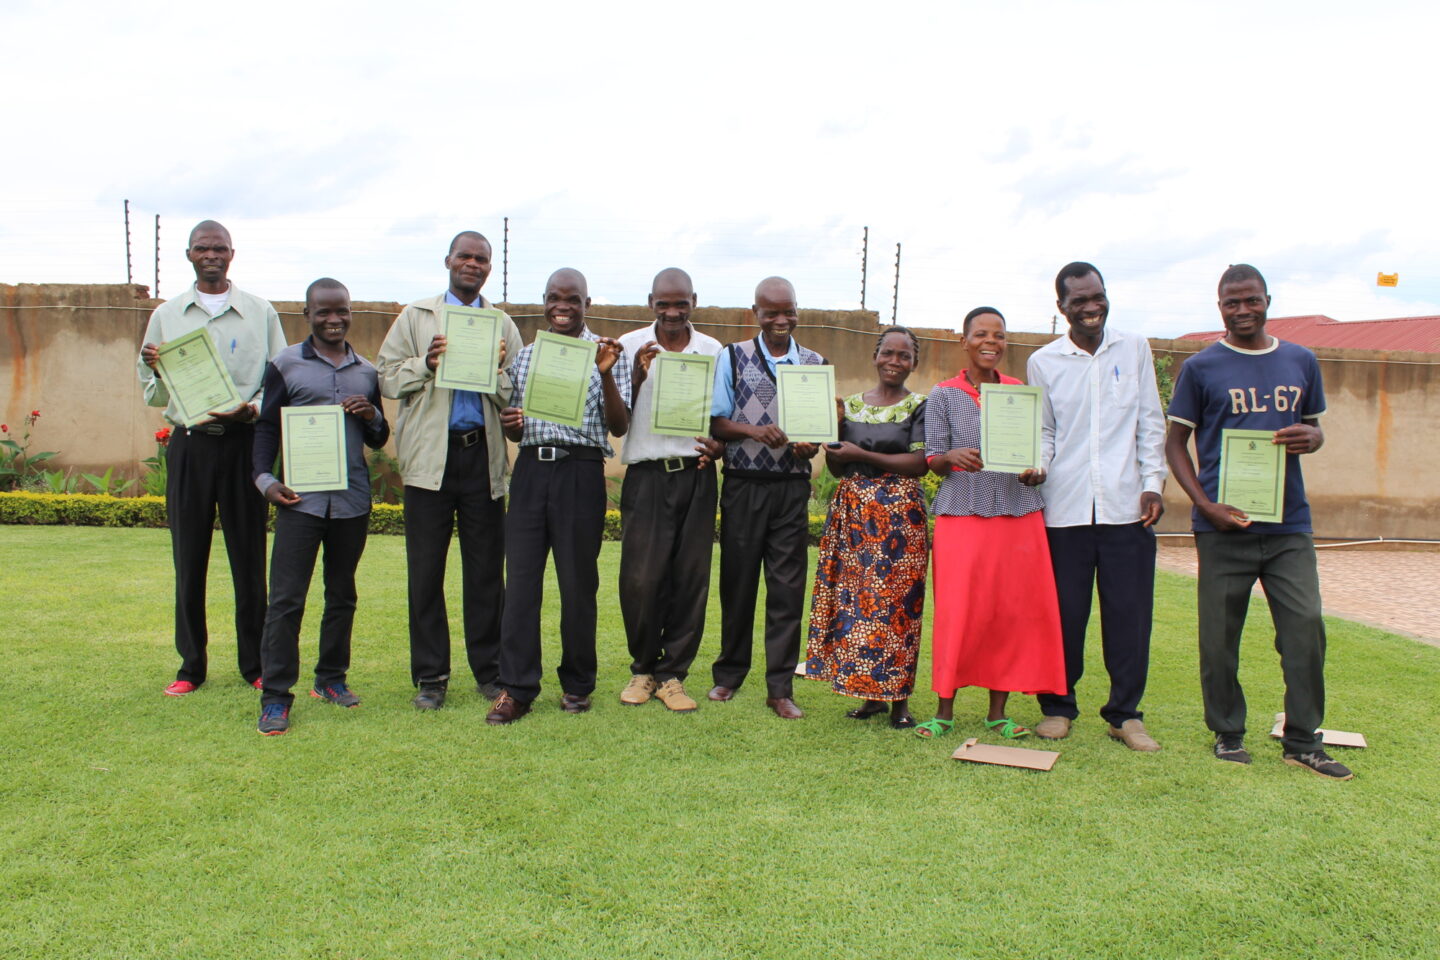 Farmers show certificates they received to become a cooperative in Malawi